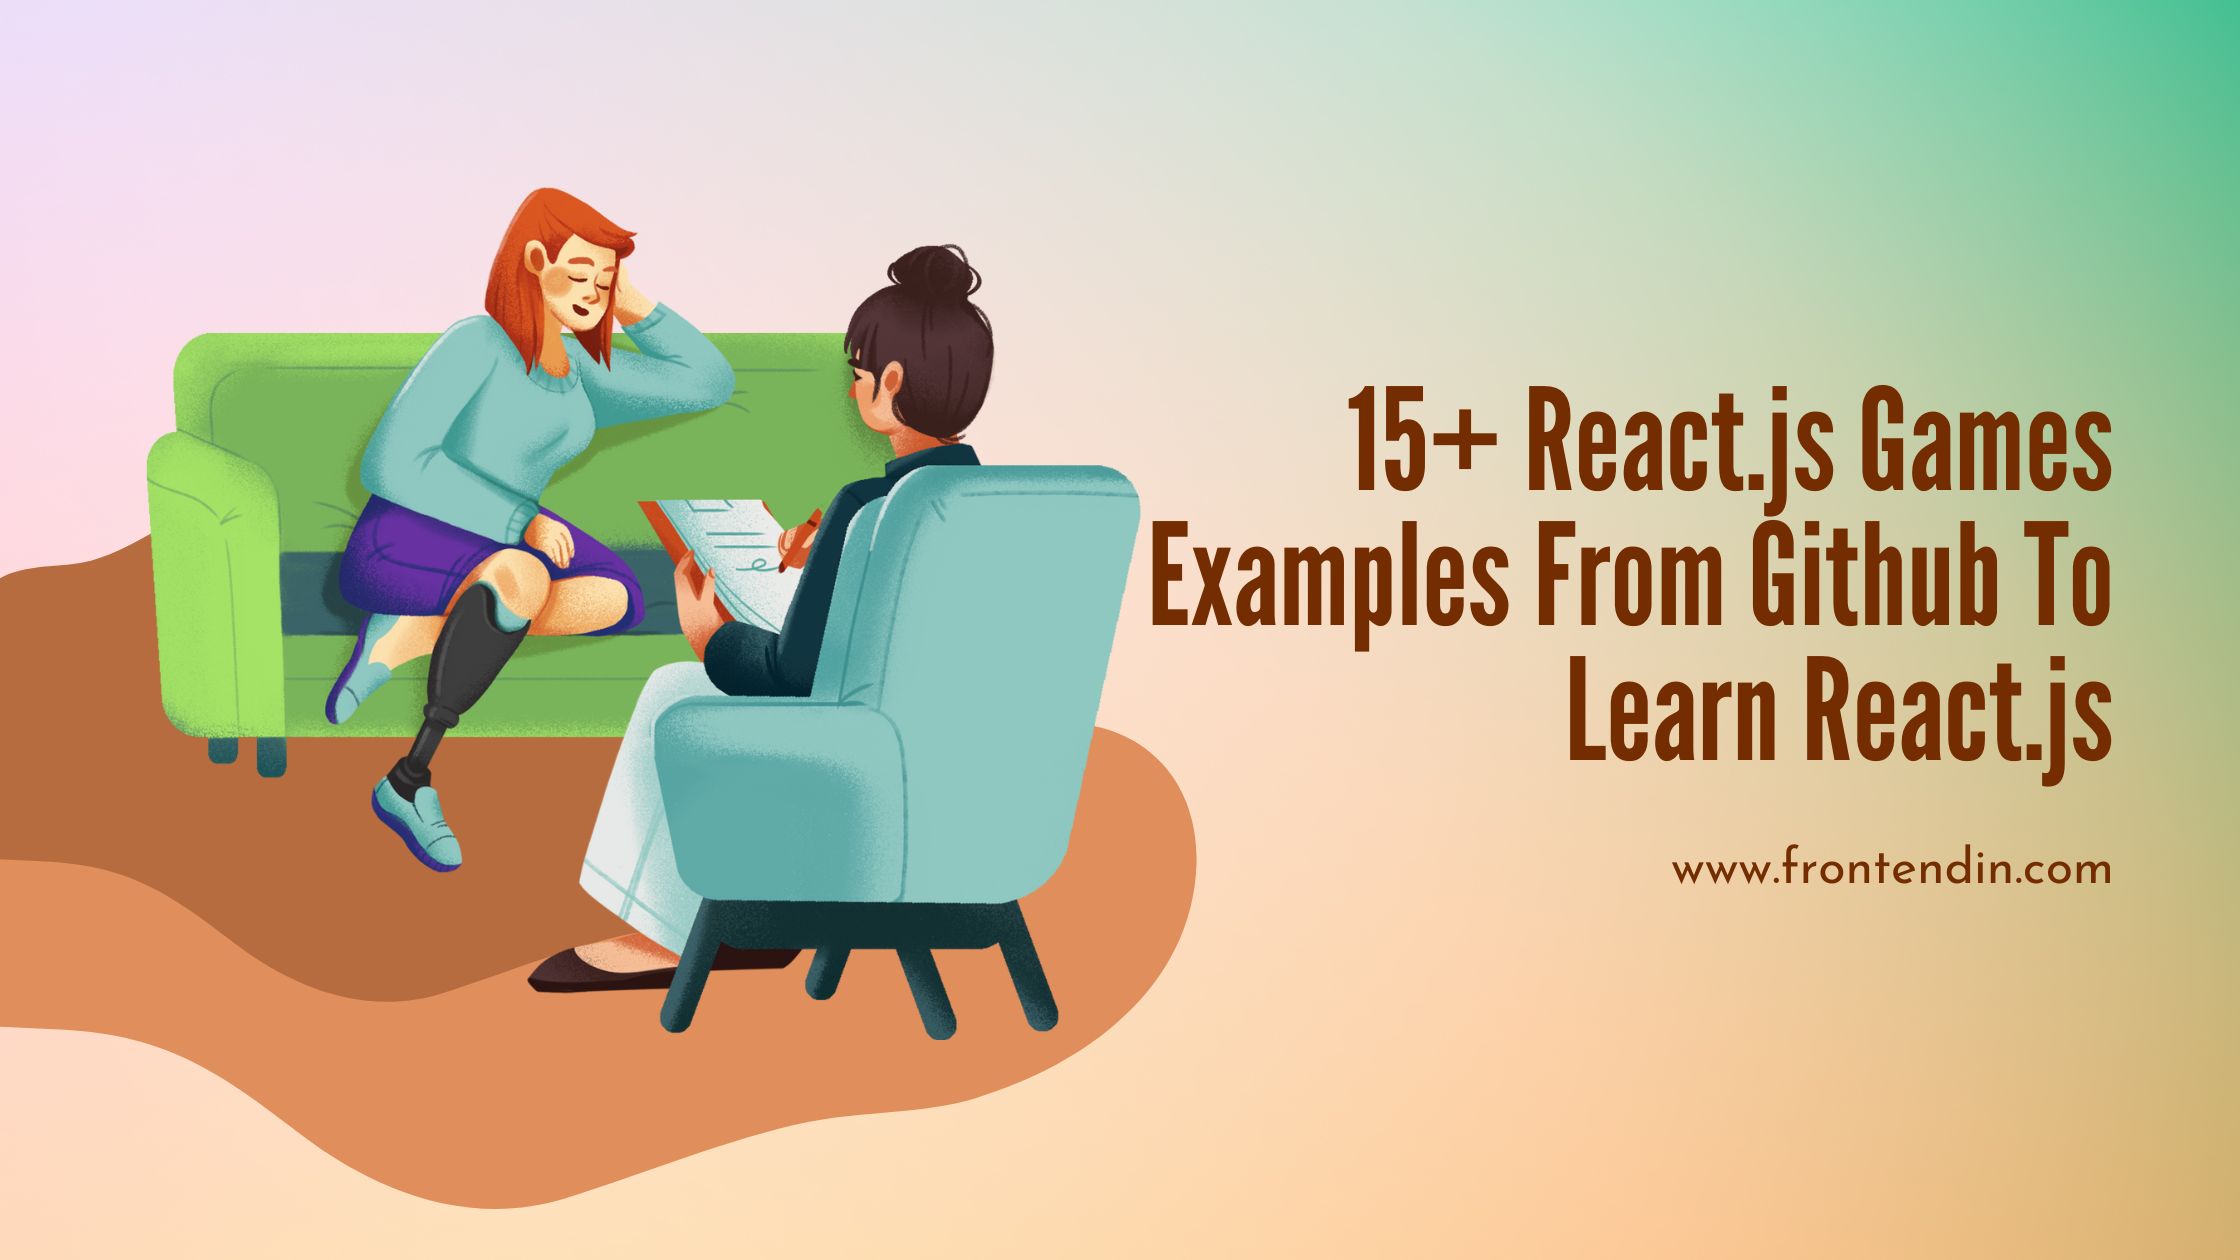 15+ React.js Games Examples From Github To Learn React.js